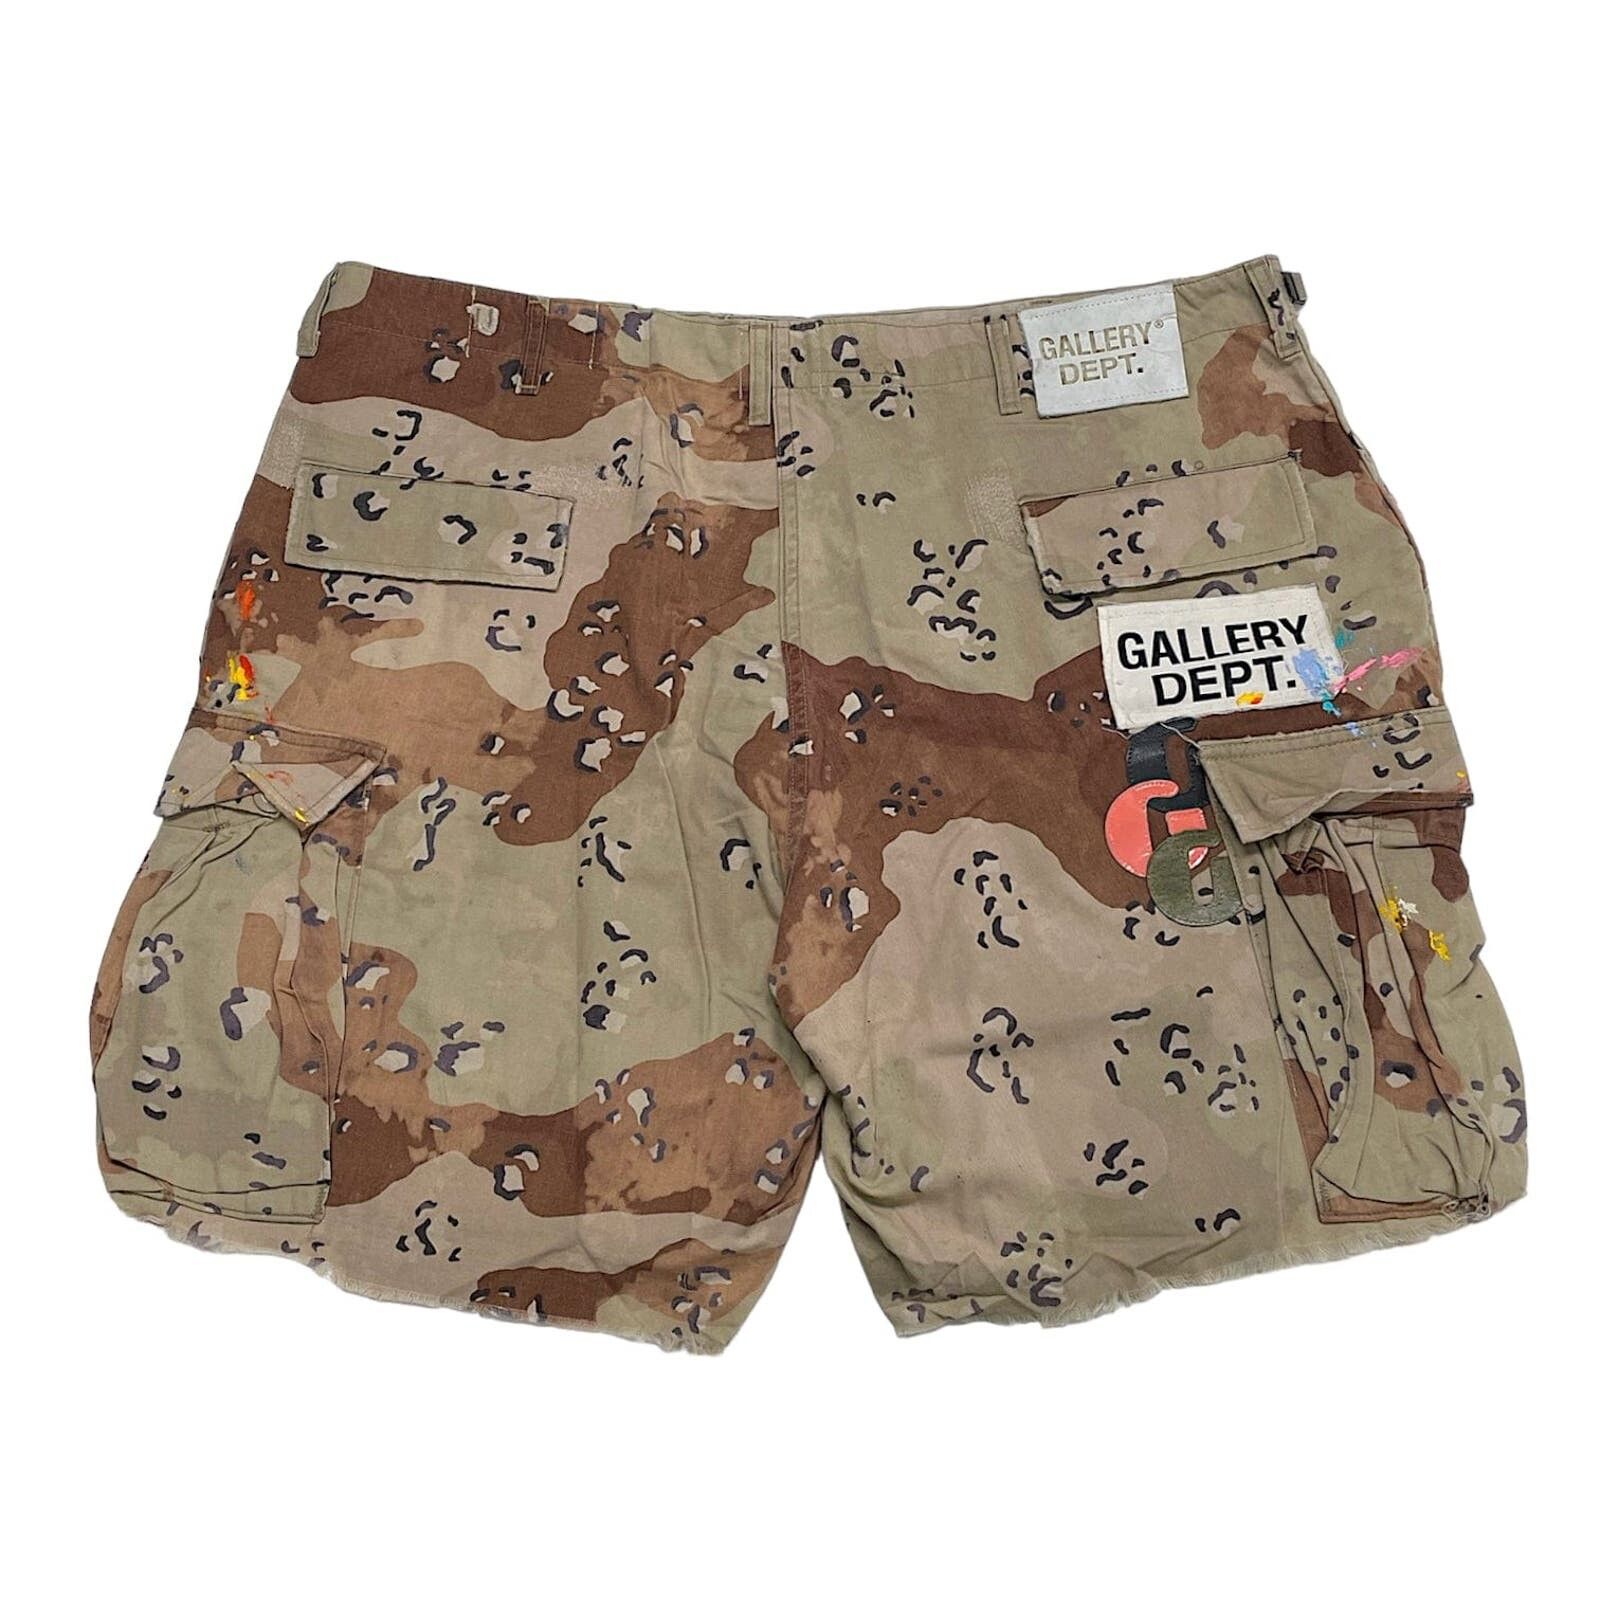 Gallery Dept. Gallery Department Cargo Shorts Chocolate Chip Camo | Grailed